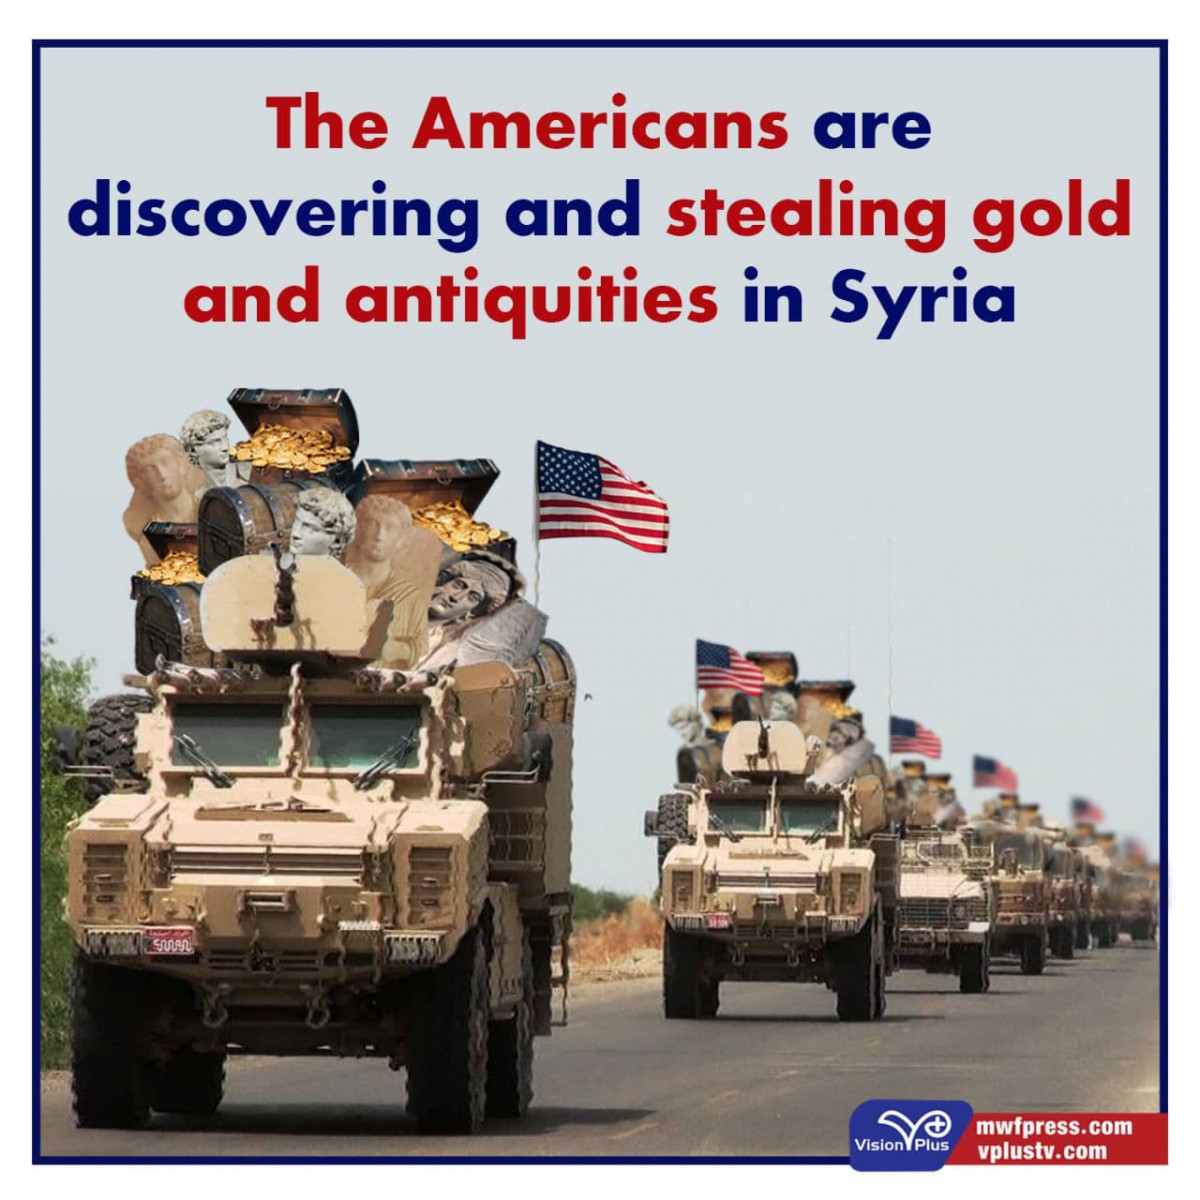 The Americans are discovering and stealing gold and antiquities in Syria